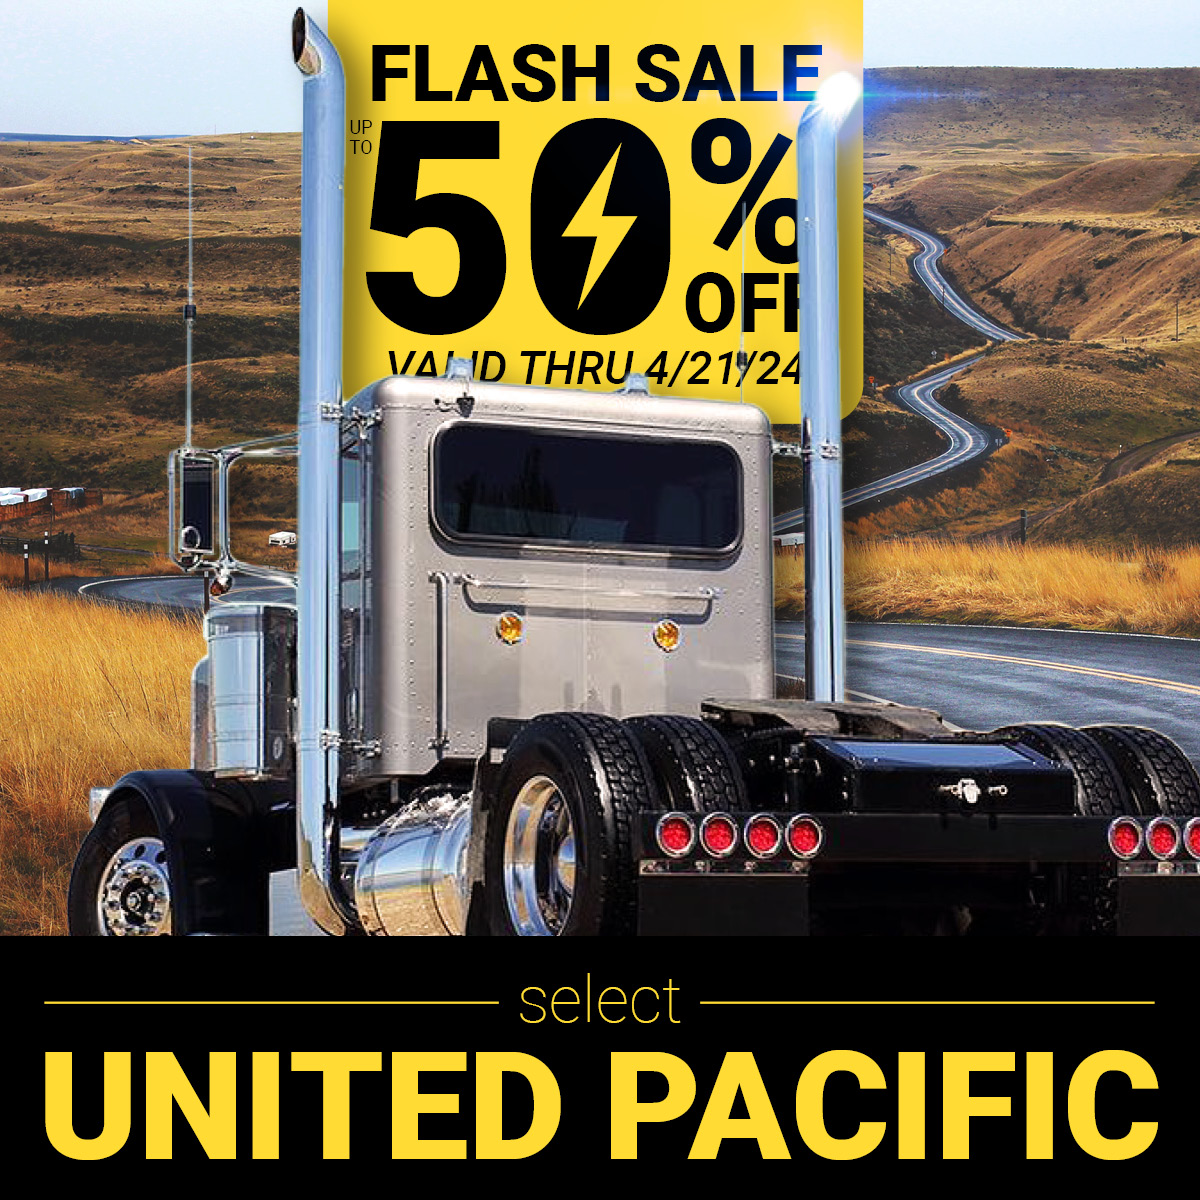 Comin' at ya with a⚡Flash Sale!⚡
Follow the link ⬇️ for 50% OFF these United Pacific products:
4statetrucks.com/sales_promo_3/
Ends 4/21 11:59 p.m. cst. 

#4StateTrucks #ChromeShopMafia #semitrucks #trucking #bigrig #18wheeler #tractortrailer #cdldriver #truckers #longhaul #diesel